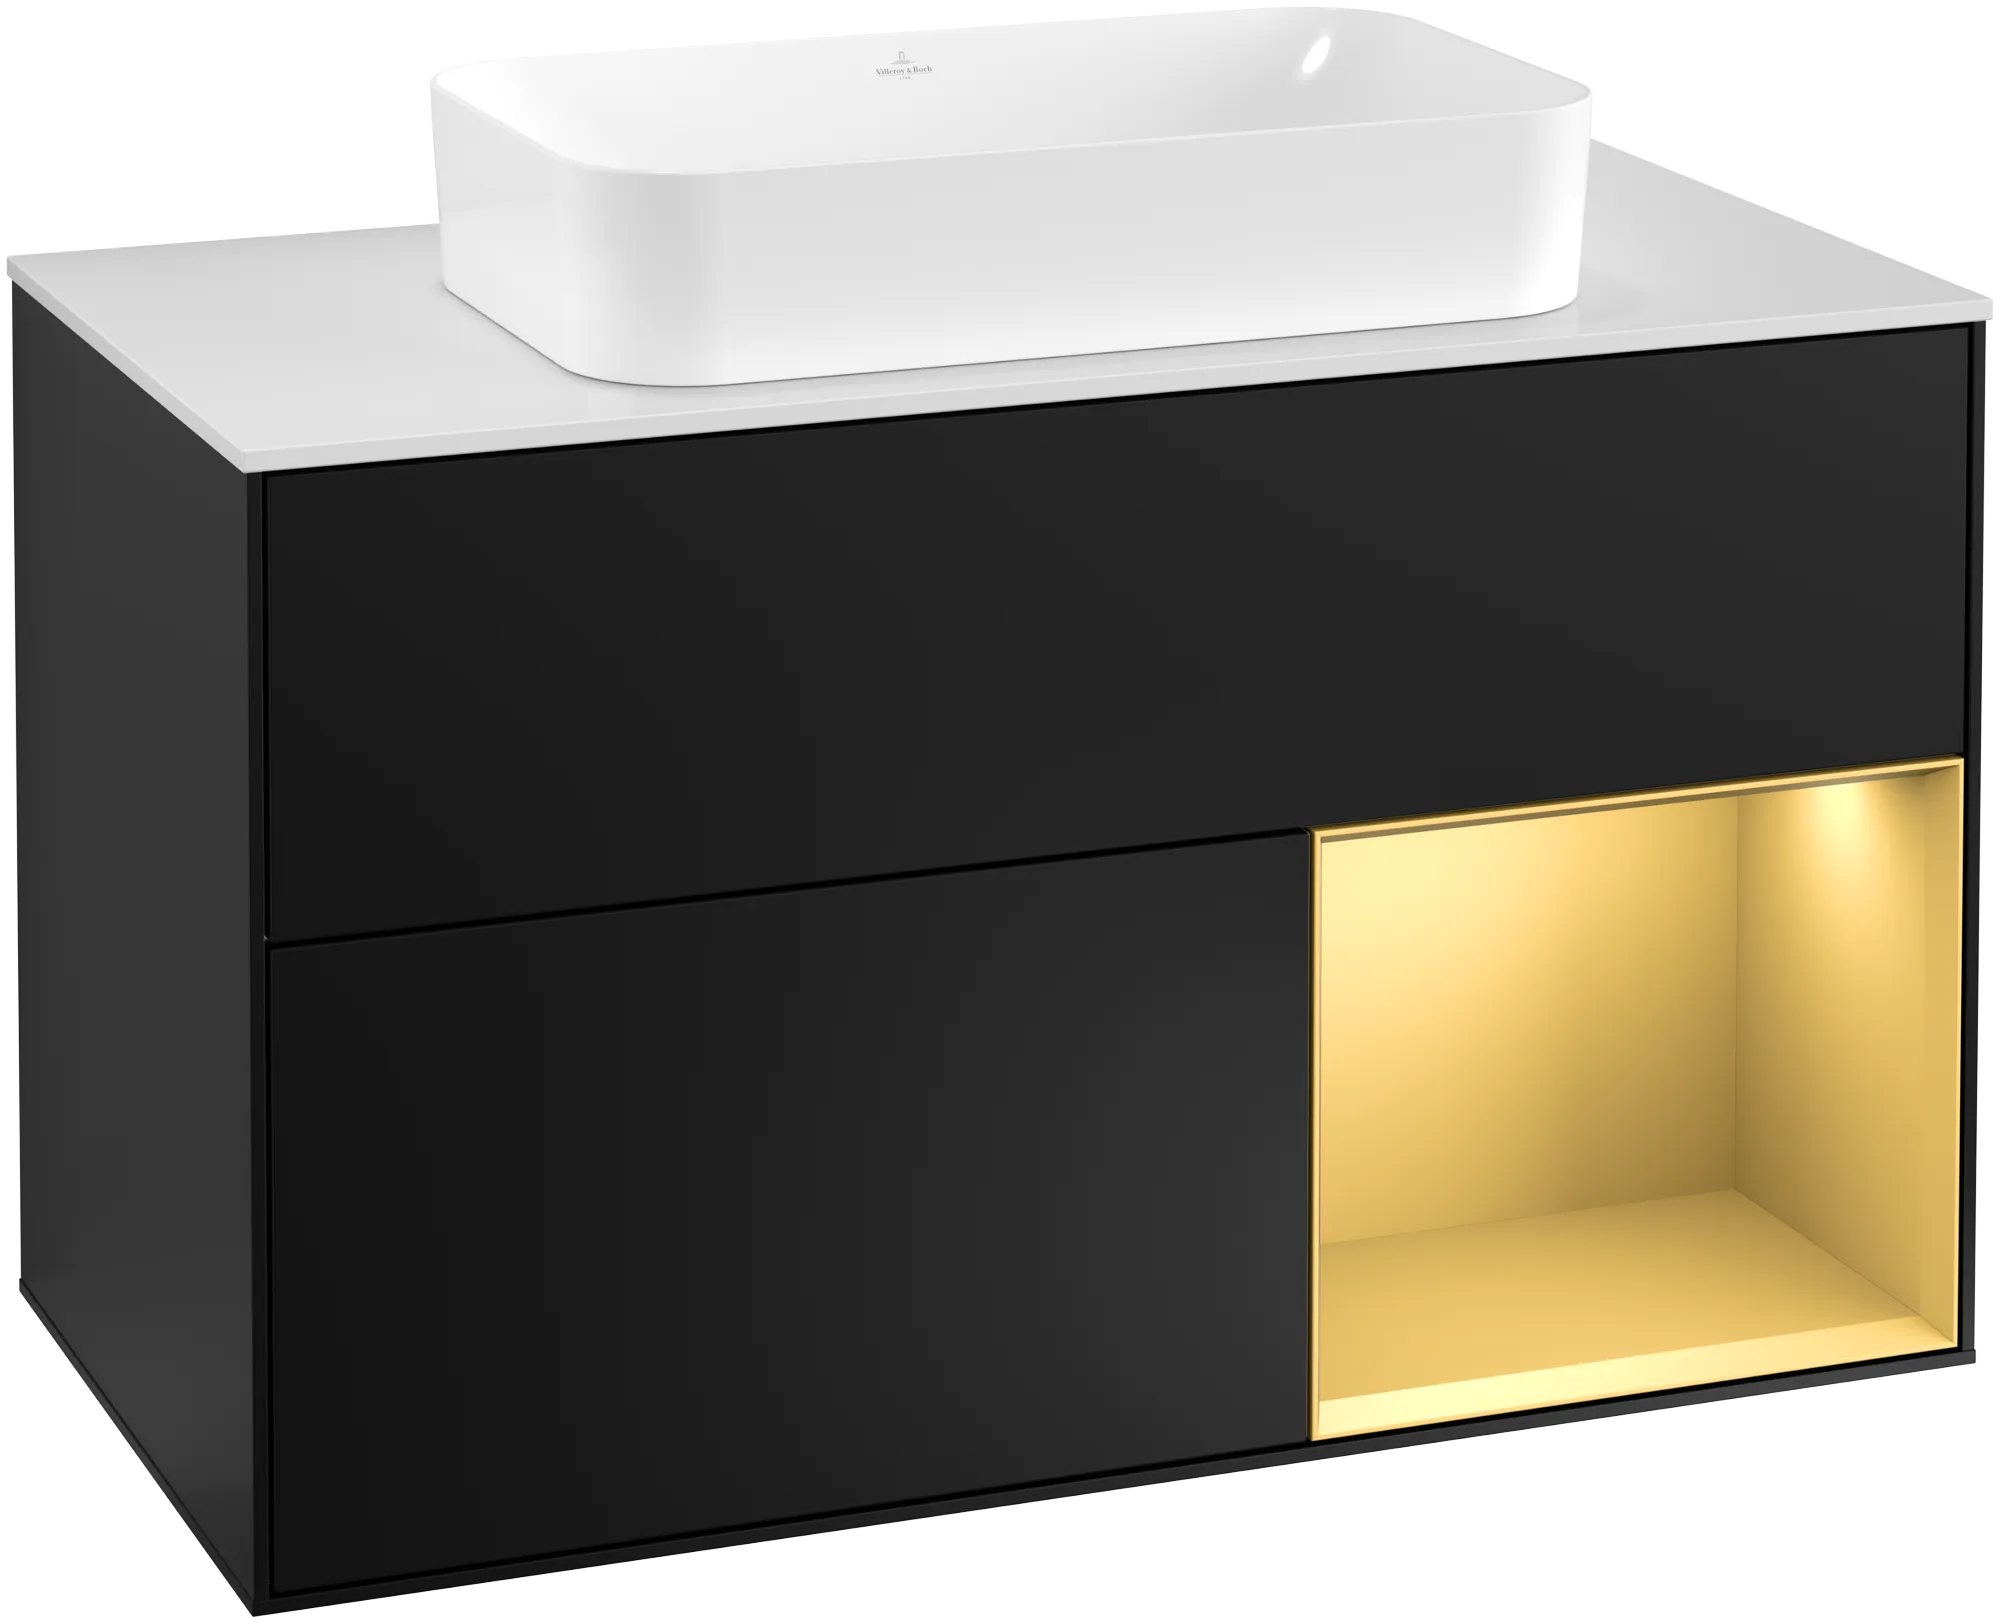 Picture of VILLEROY BOCH Finion Vanity unit, with lighting, 2 pull-out compartments, 1000 x 603 x 501 mm, Black Matt Lacquer / Gold Matt Lacquer / Glass White Matt #G251HFPD